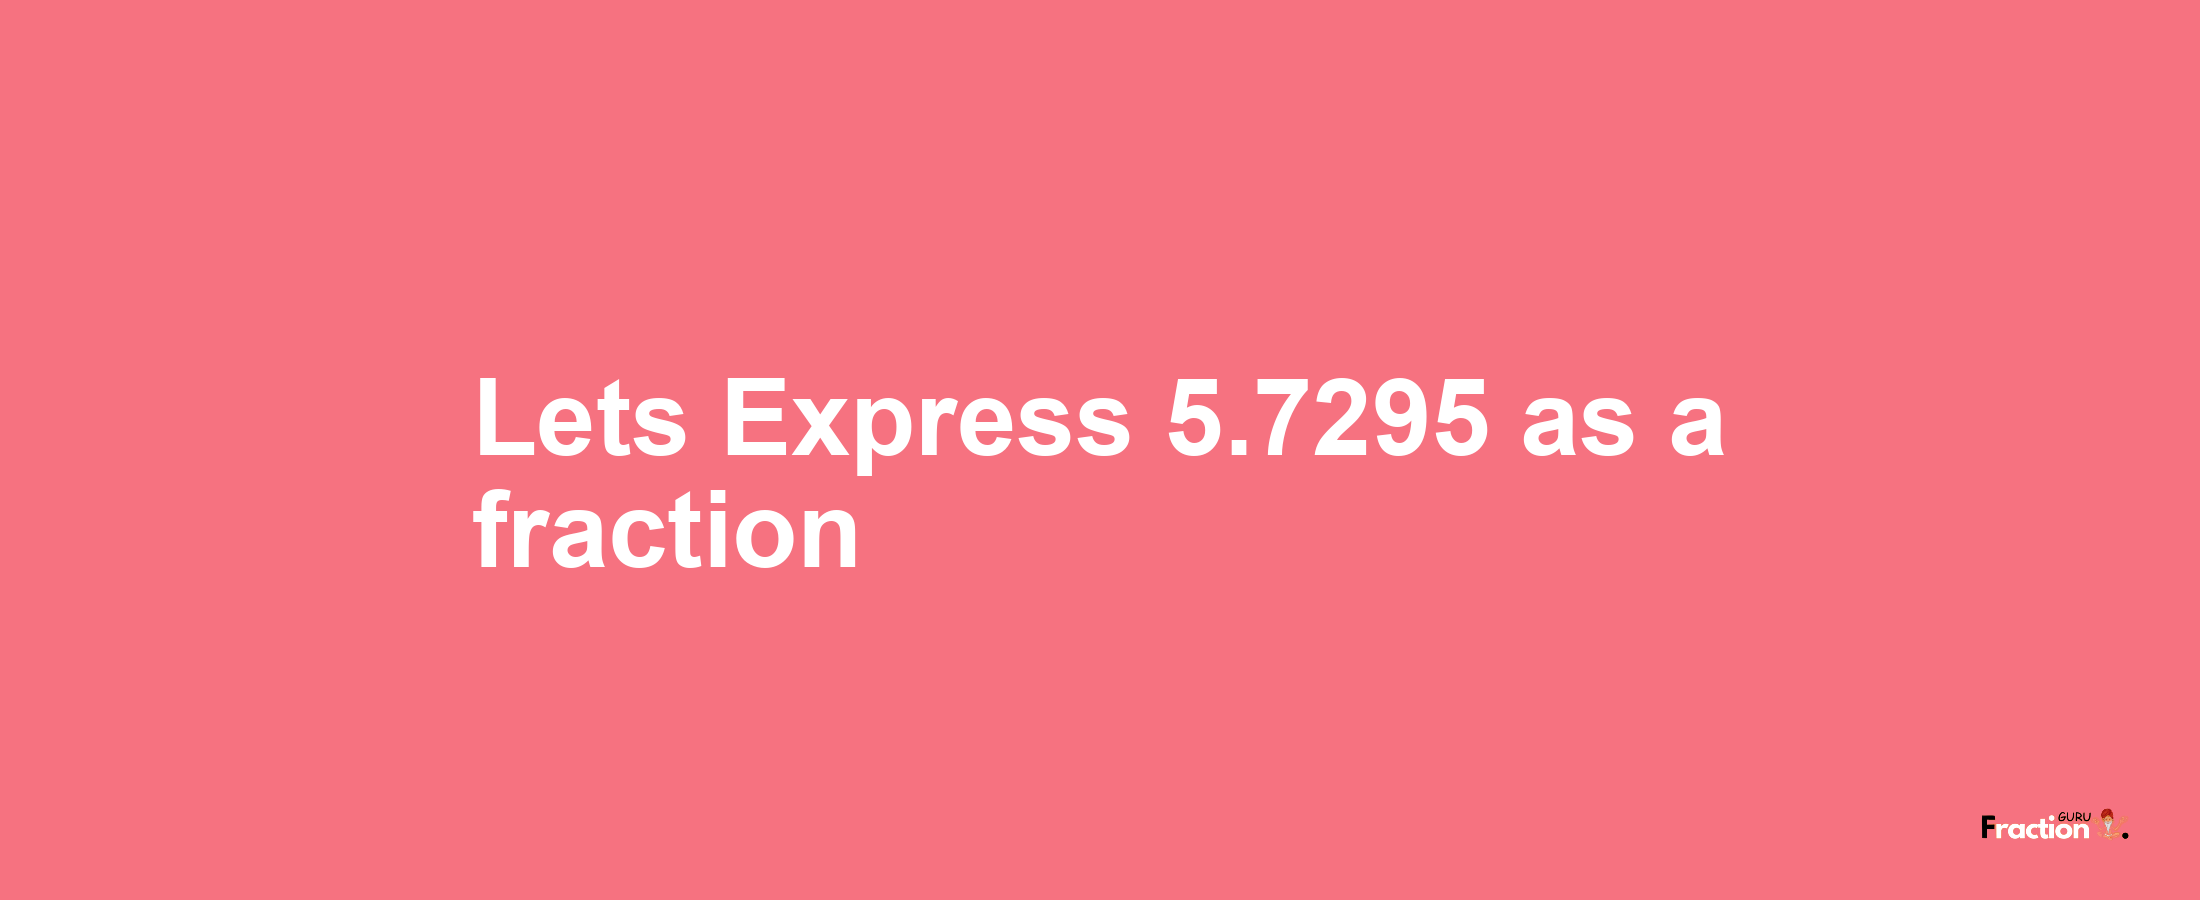 Lets Express 5.7295 as afraction